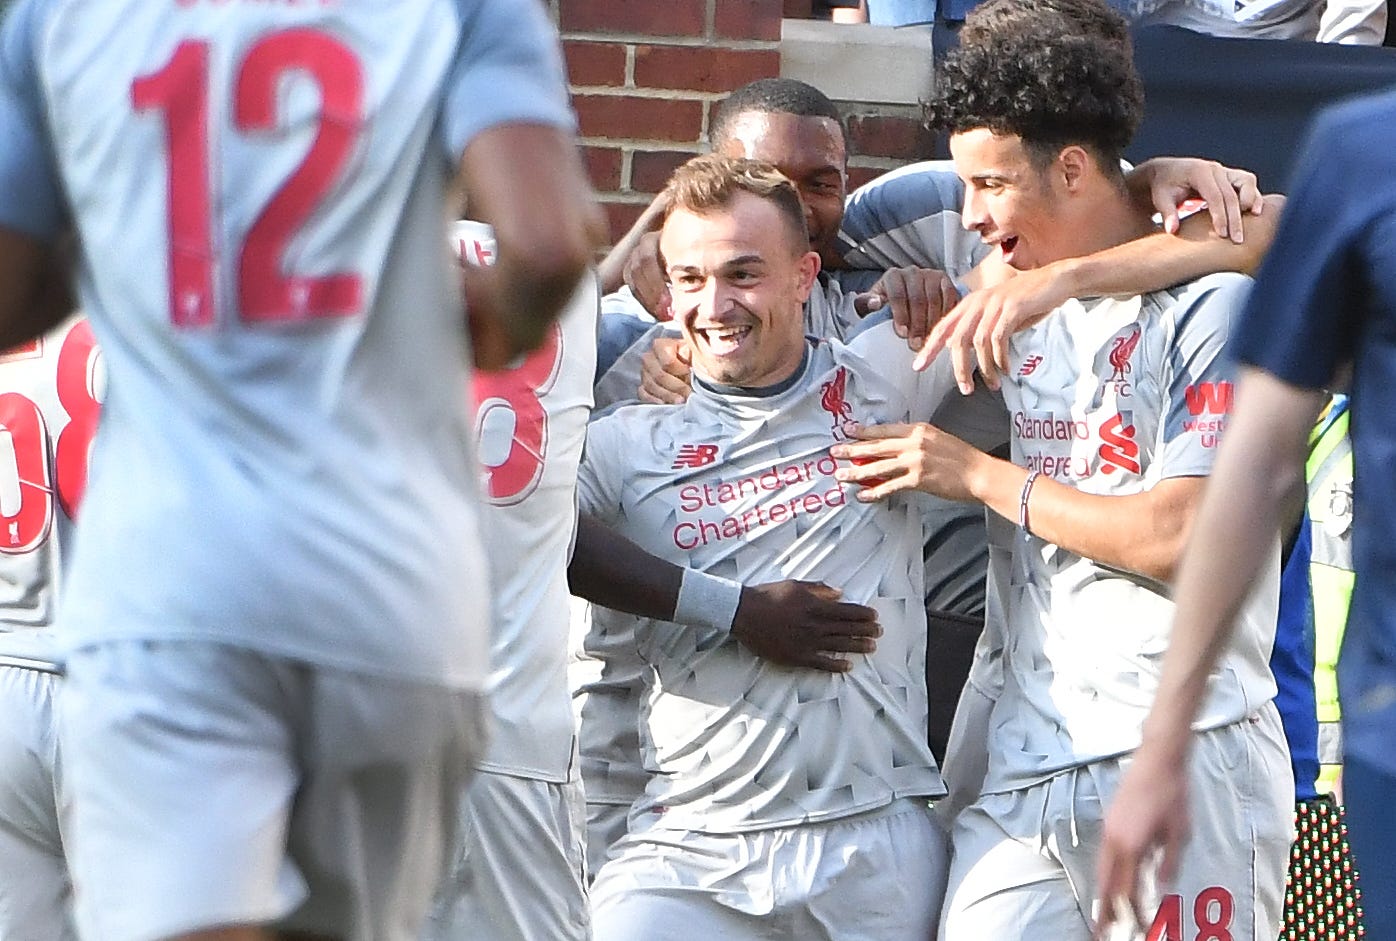 In the second half, Midfielder Sheridan Shaqiri celebrates after putting in goal #4 for Liverpool in the 4-1 victory over Manchester at Michigan Stadium.